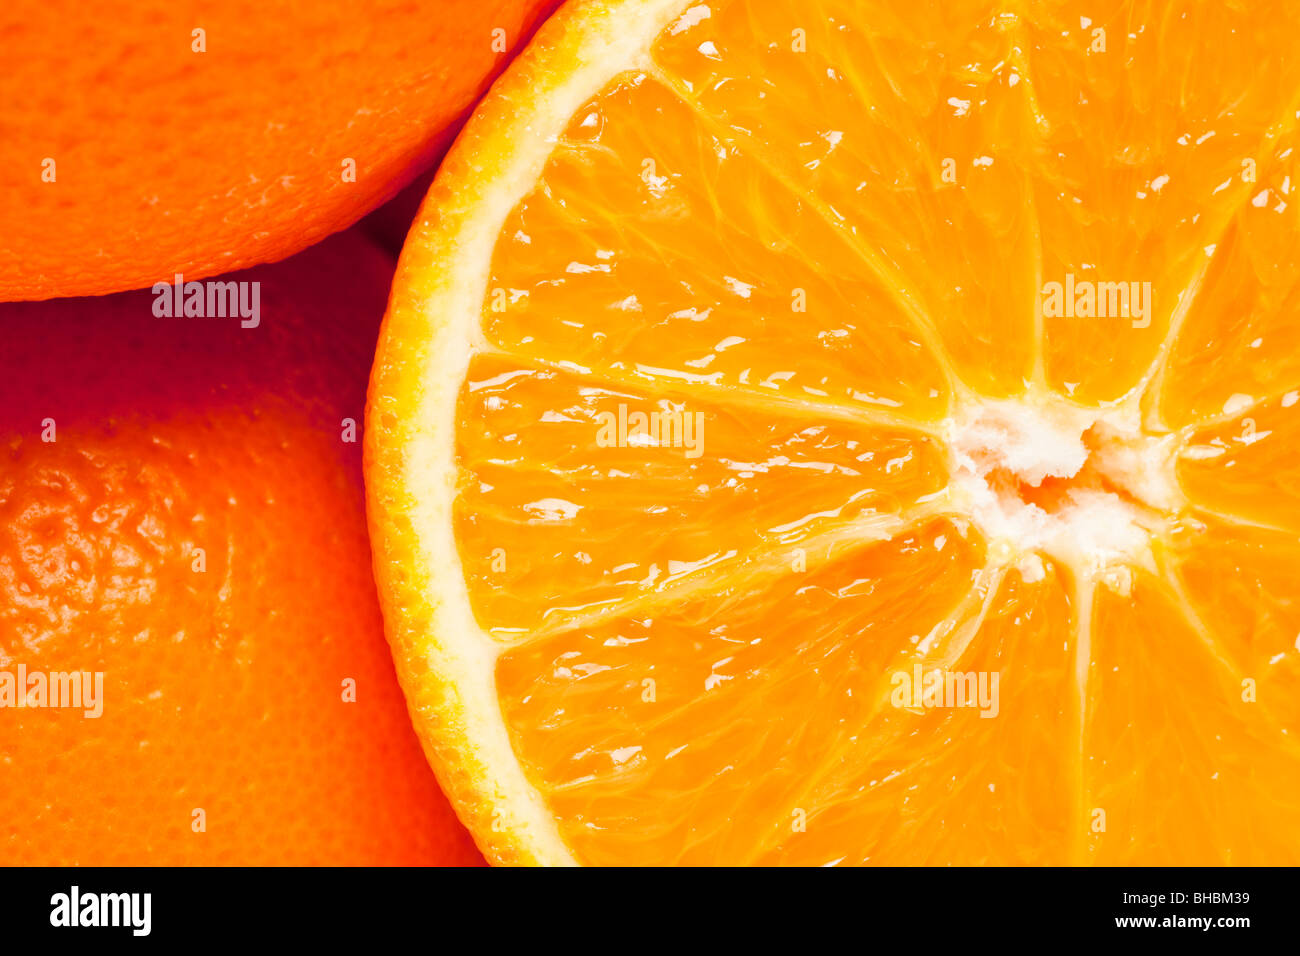 Flat lay overhead close up shot of oranges whole and halved Stock Photo